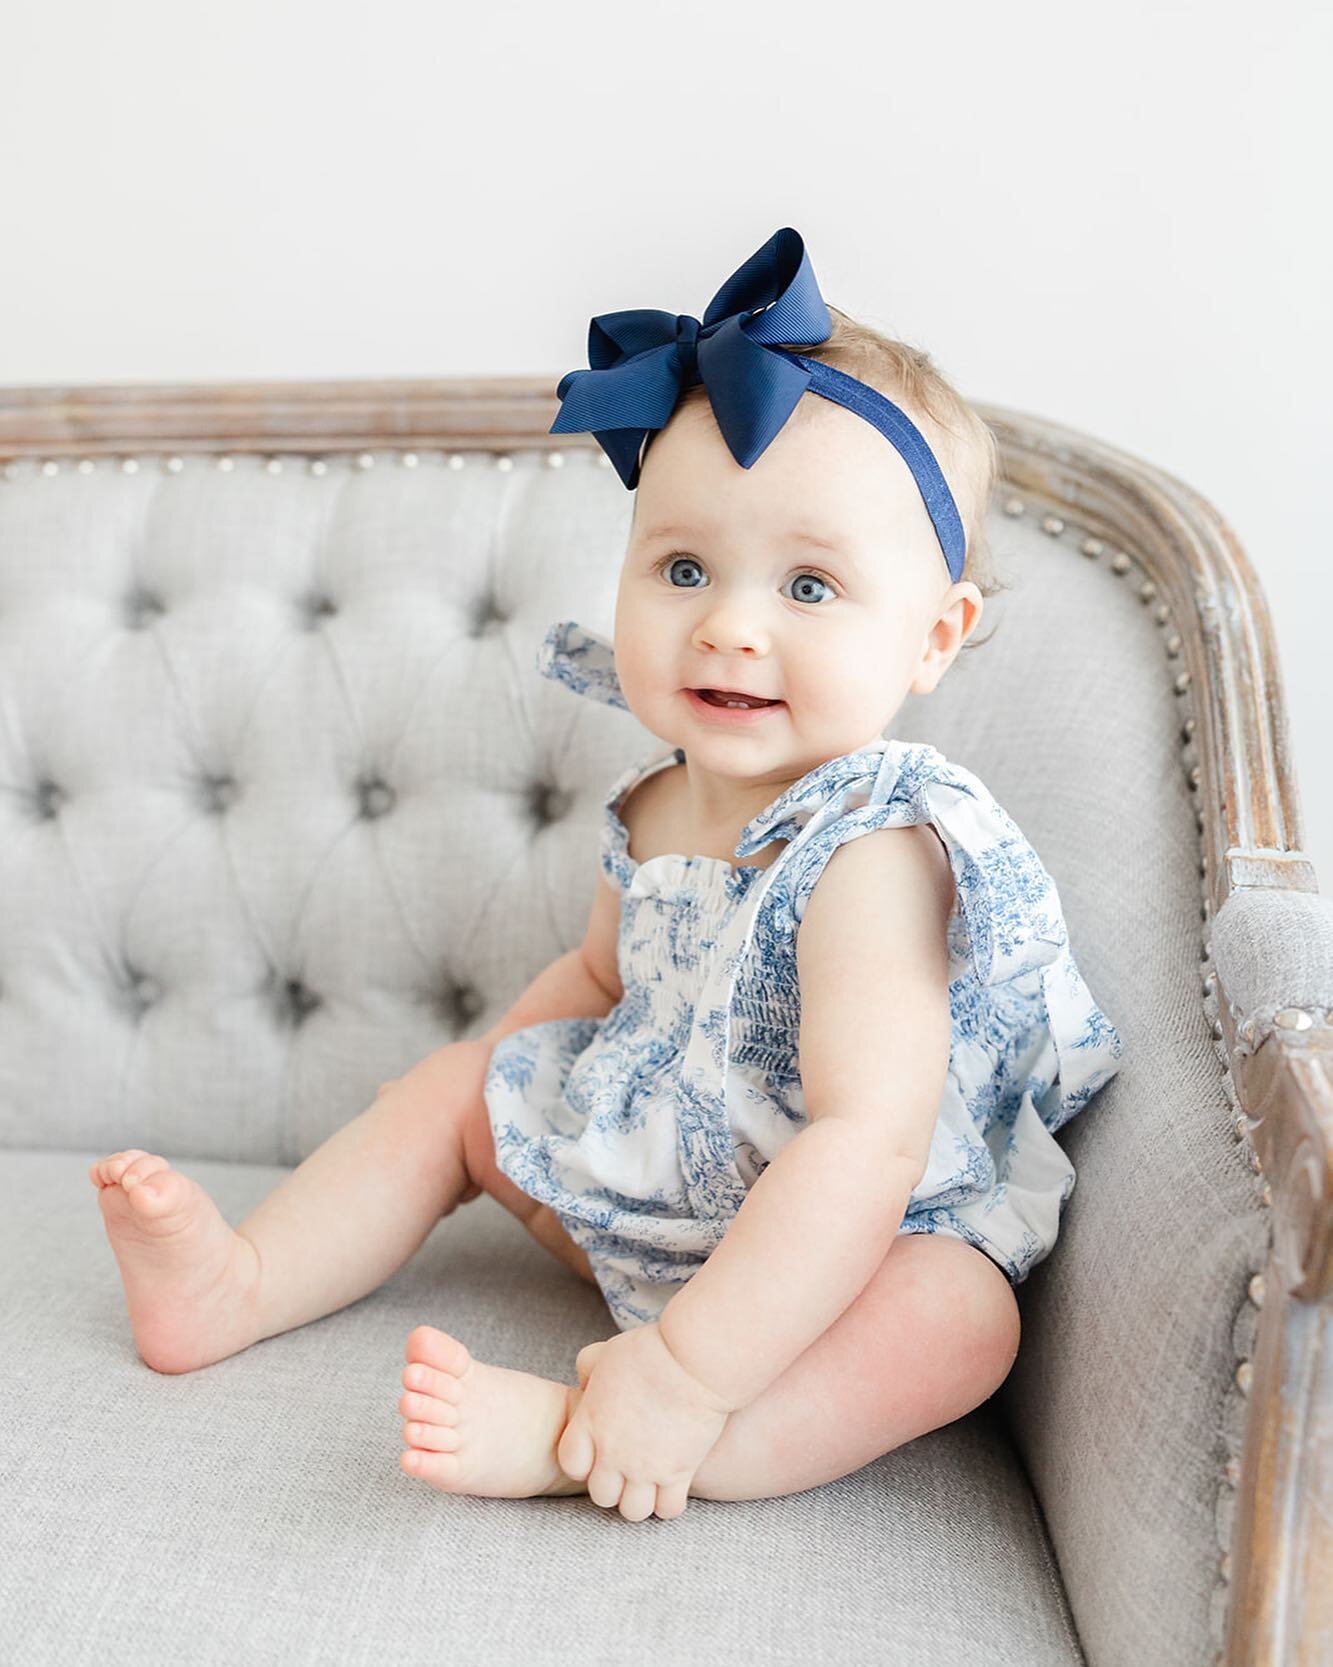 This little cutie has grown so much since her newborn session but still has those bright blue eyes!

#ctphotographer #ctfamilyphotographer #ctfamilyphotography #familyphotographerct #connecticutfamilyphotographer #connecticutphotographer #fairfieldco